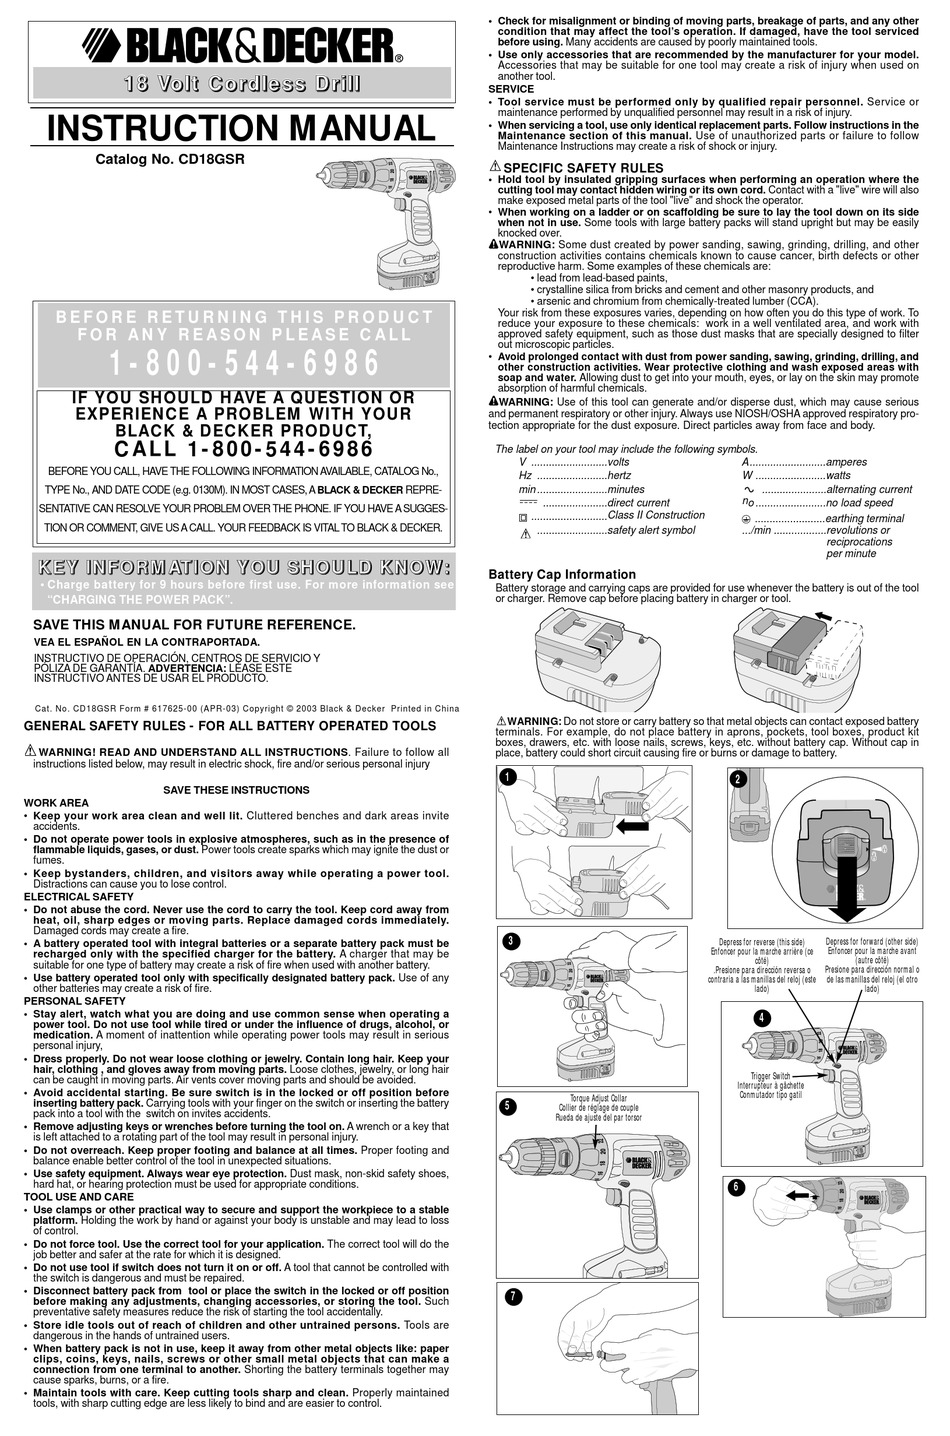 User manual Black & Decker STC1820 (English - 112 pages)